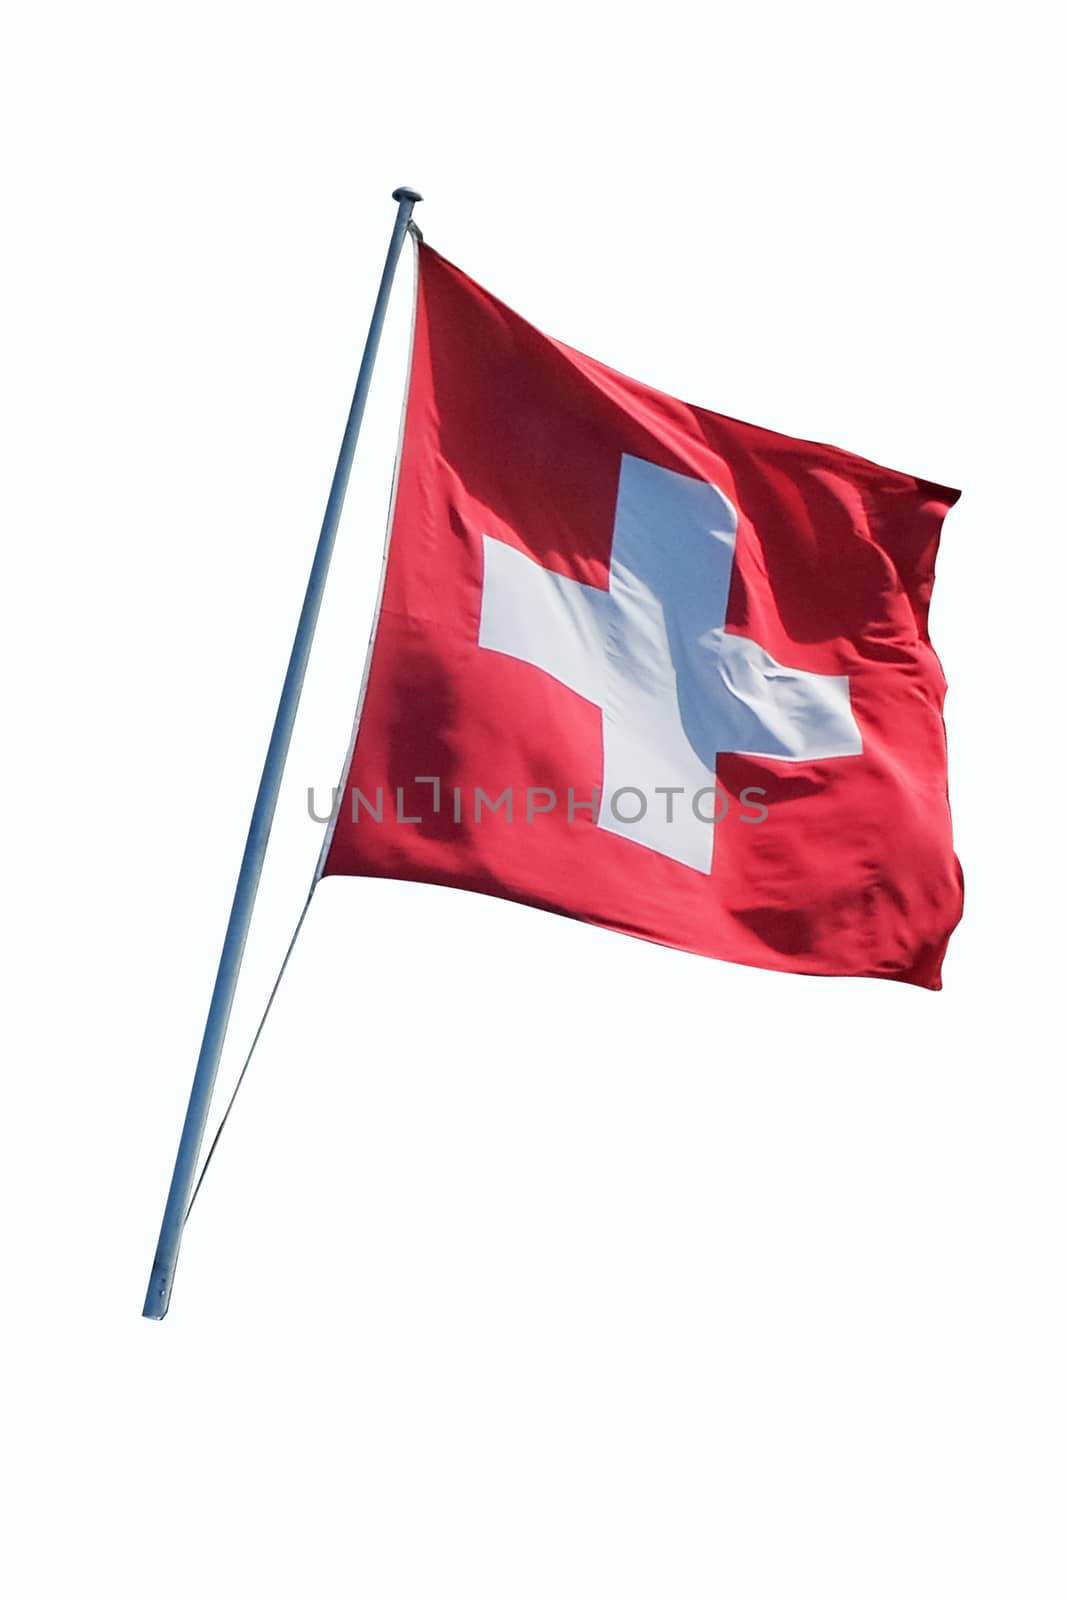 Swiss flag flying on a metal pole, isolated on a white backgroun by Surasak